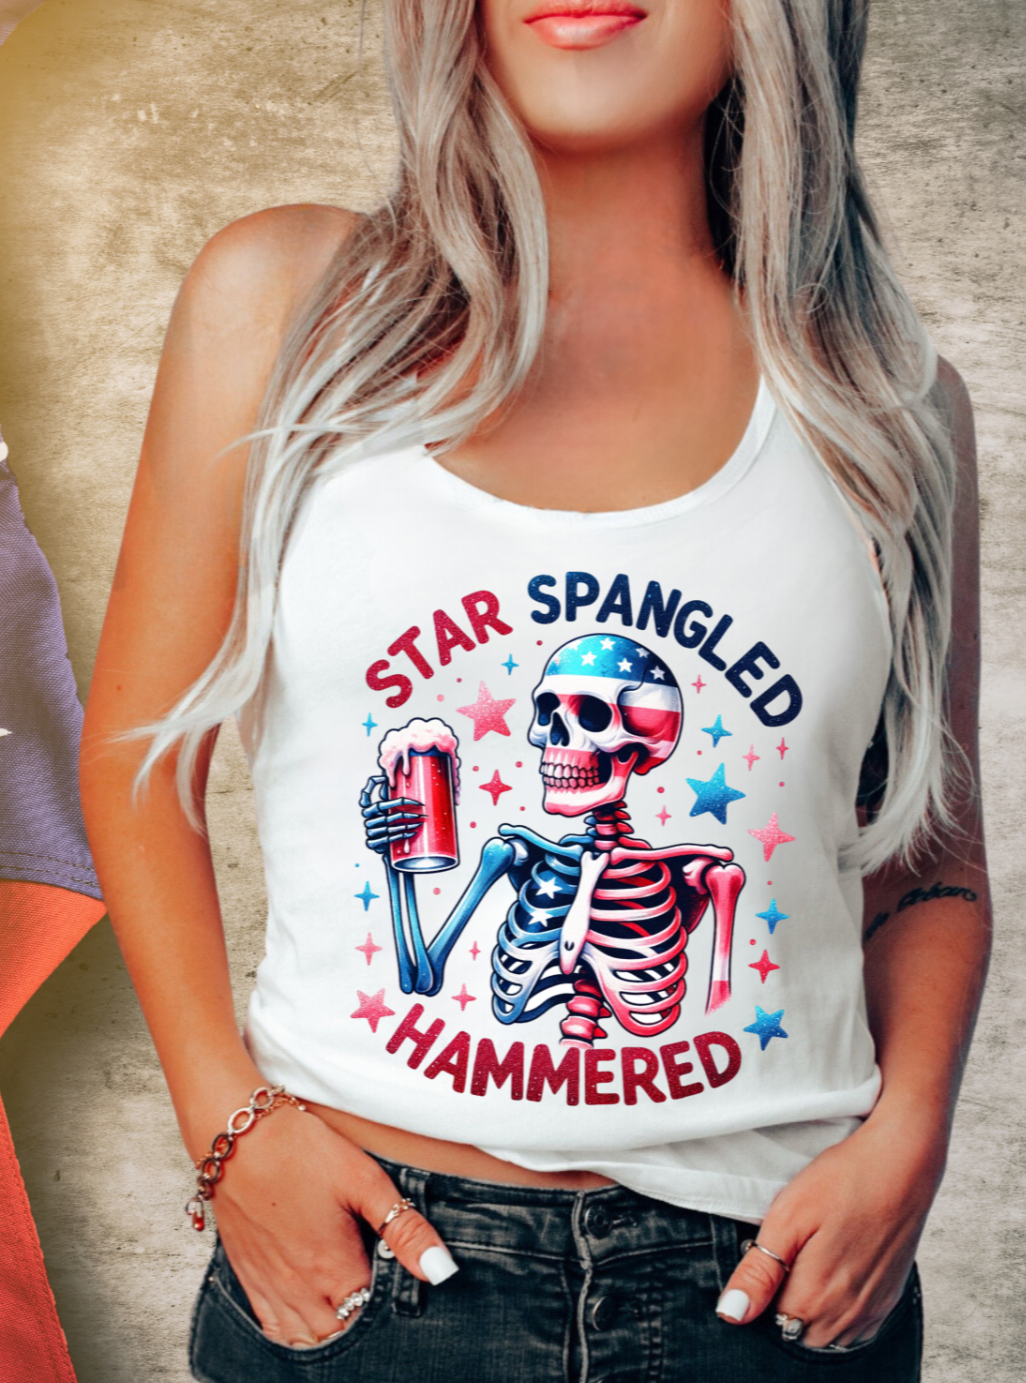 4th of July Star Spangled Hammered T-Shirt